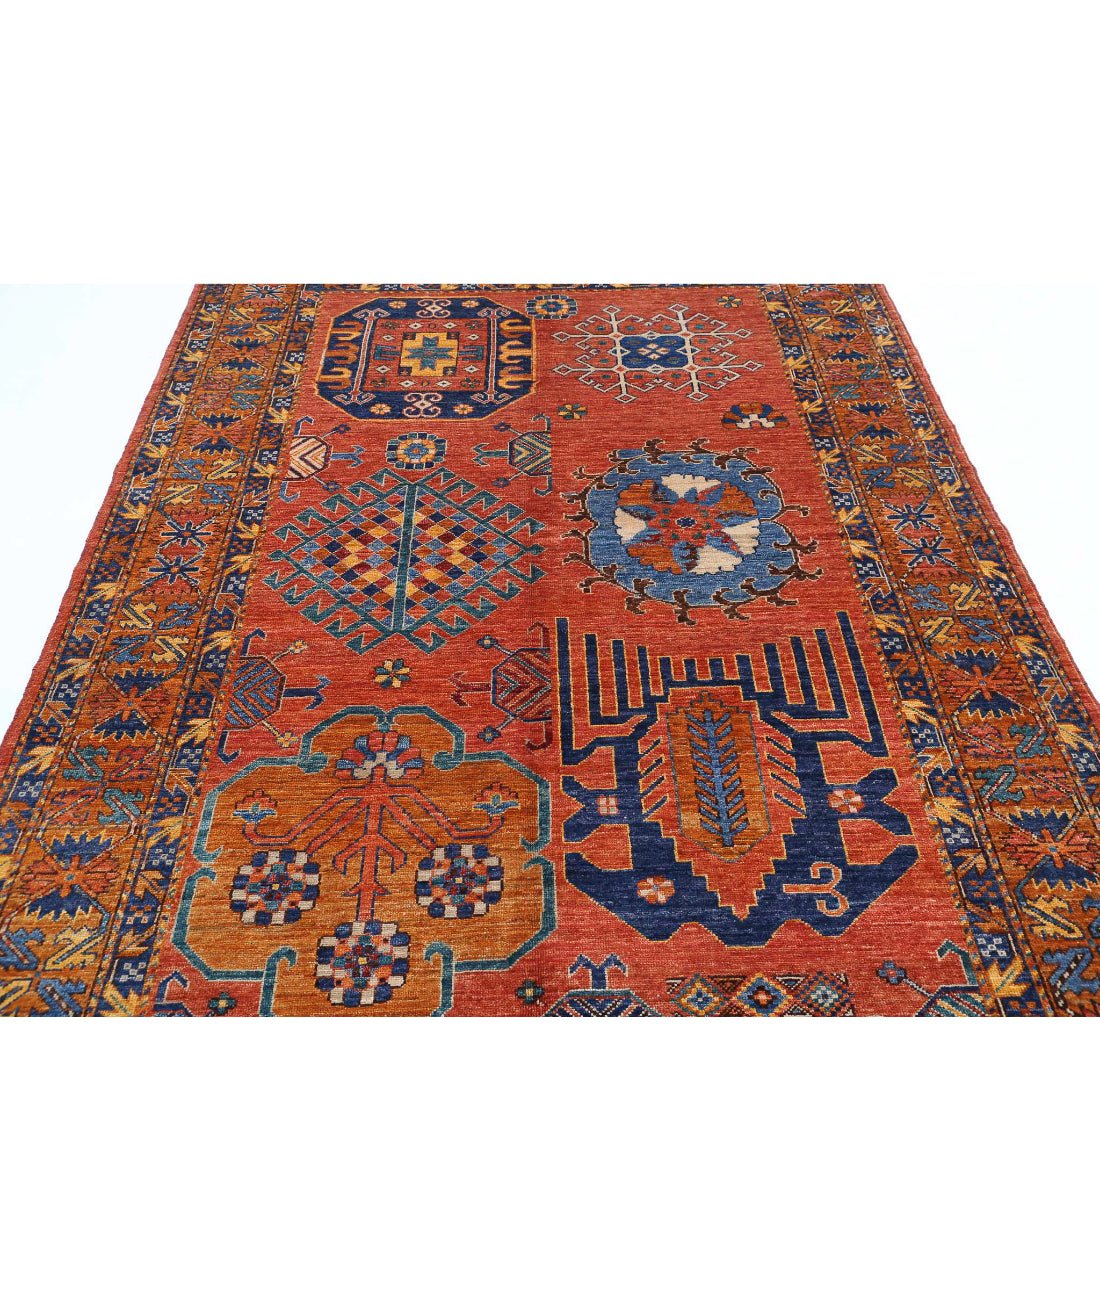 Hand Knotted Nomadic Caucasian Humna Wool Rug - 5'10'' x 8'3'' 5'10'' x 8'3'' (175 X 248) / Red / Taupe